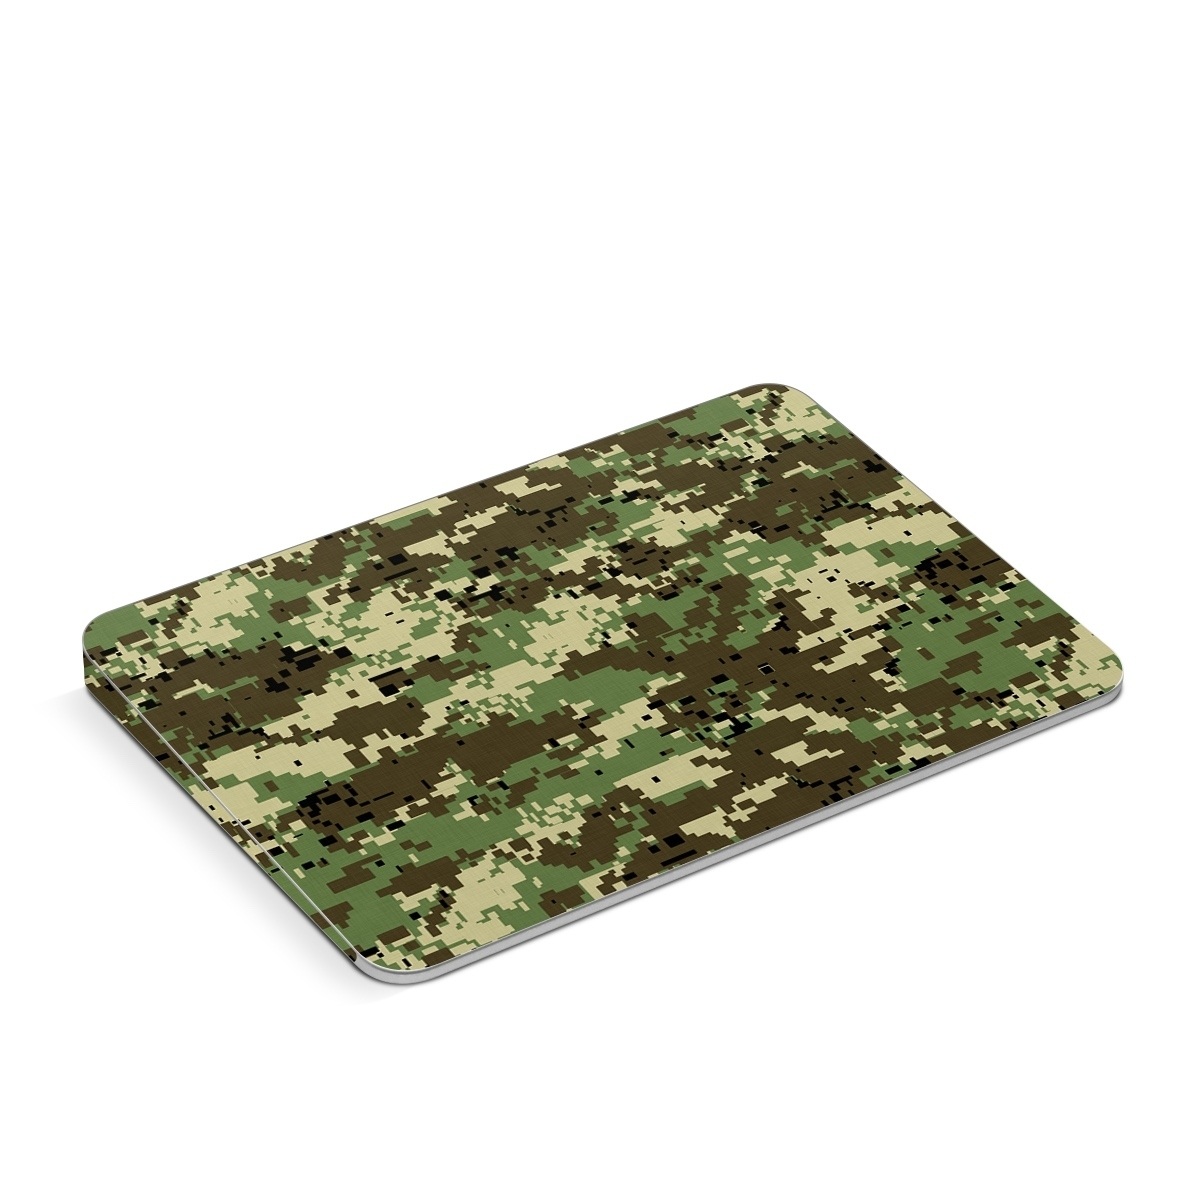 Apple Magic Trackpad Skin design of Military camouflage, Pattern, Camouflage, Green, Uniform, Clothing, Design, Military uniform, with black, gray, green colors